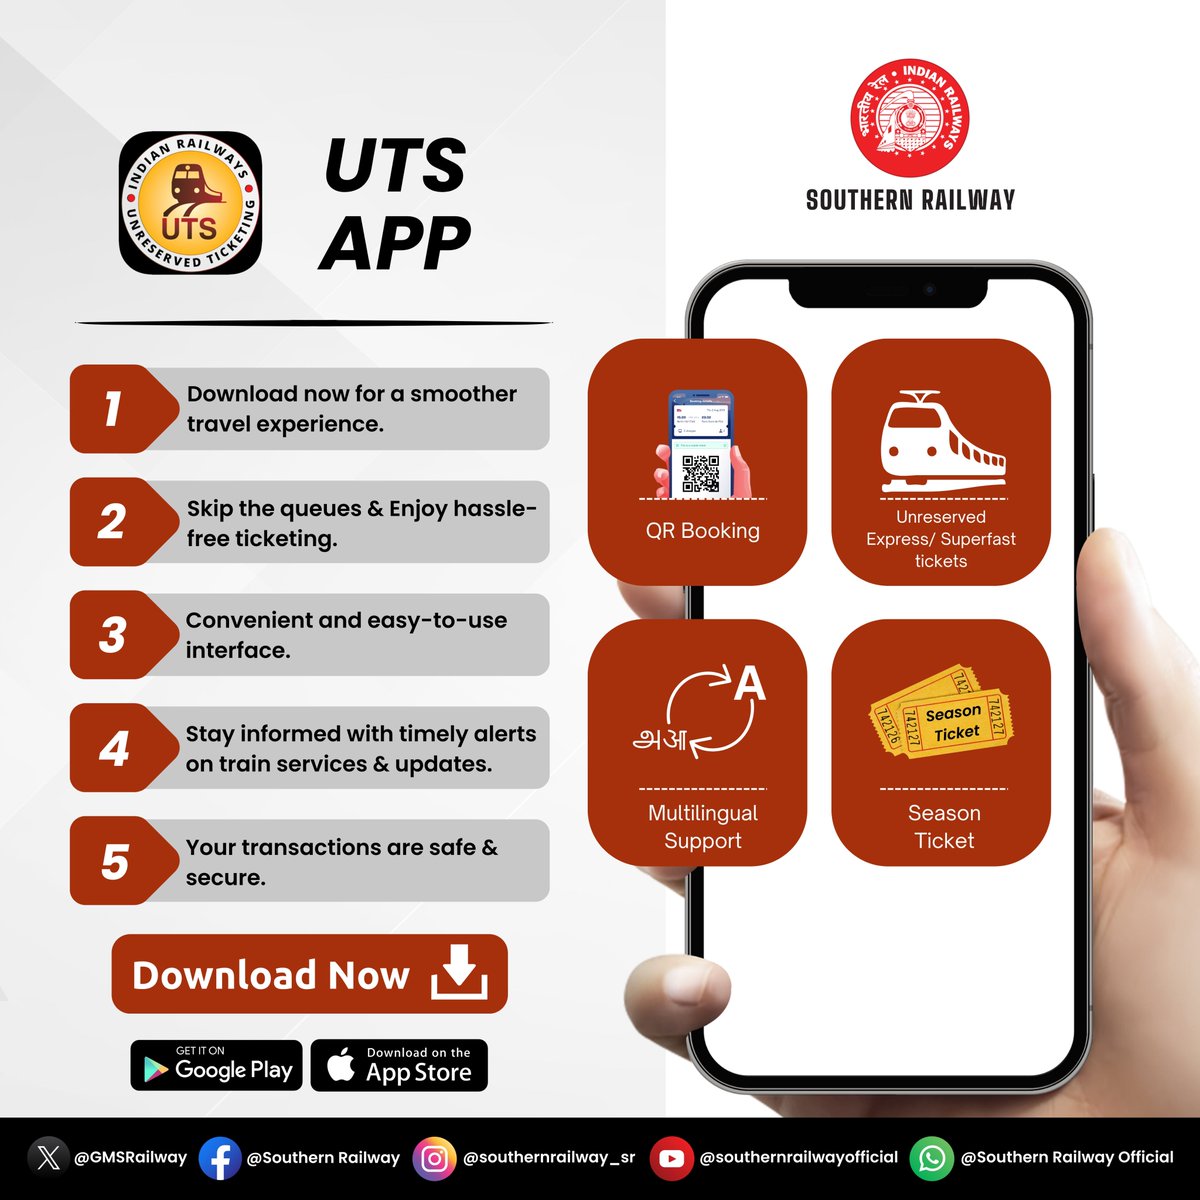 Book QR tickets, unreserved & superfast tickets, and season tickets - all on the UTS app! 

Available in multiple languages for your convenience. 

Travel smarter, travel UTS! 

#UTSapp #QRBooking #TrainTickets #DigitalIndia #SouthernRailway